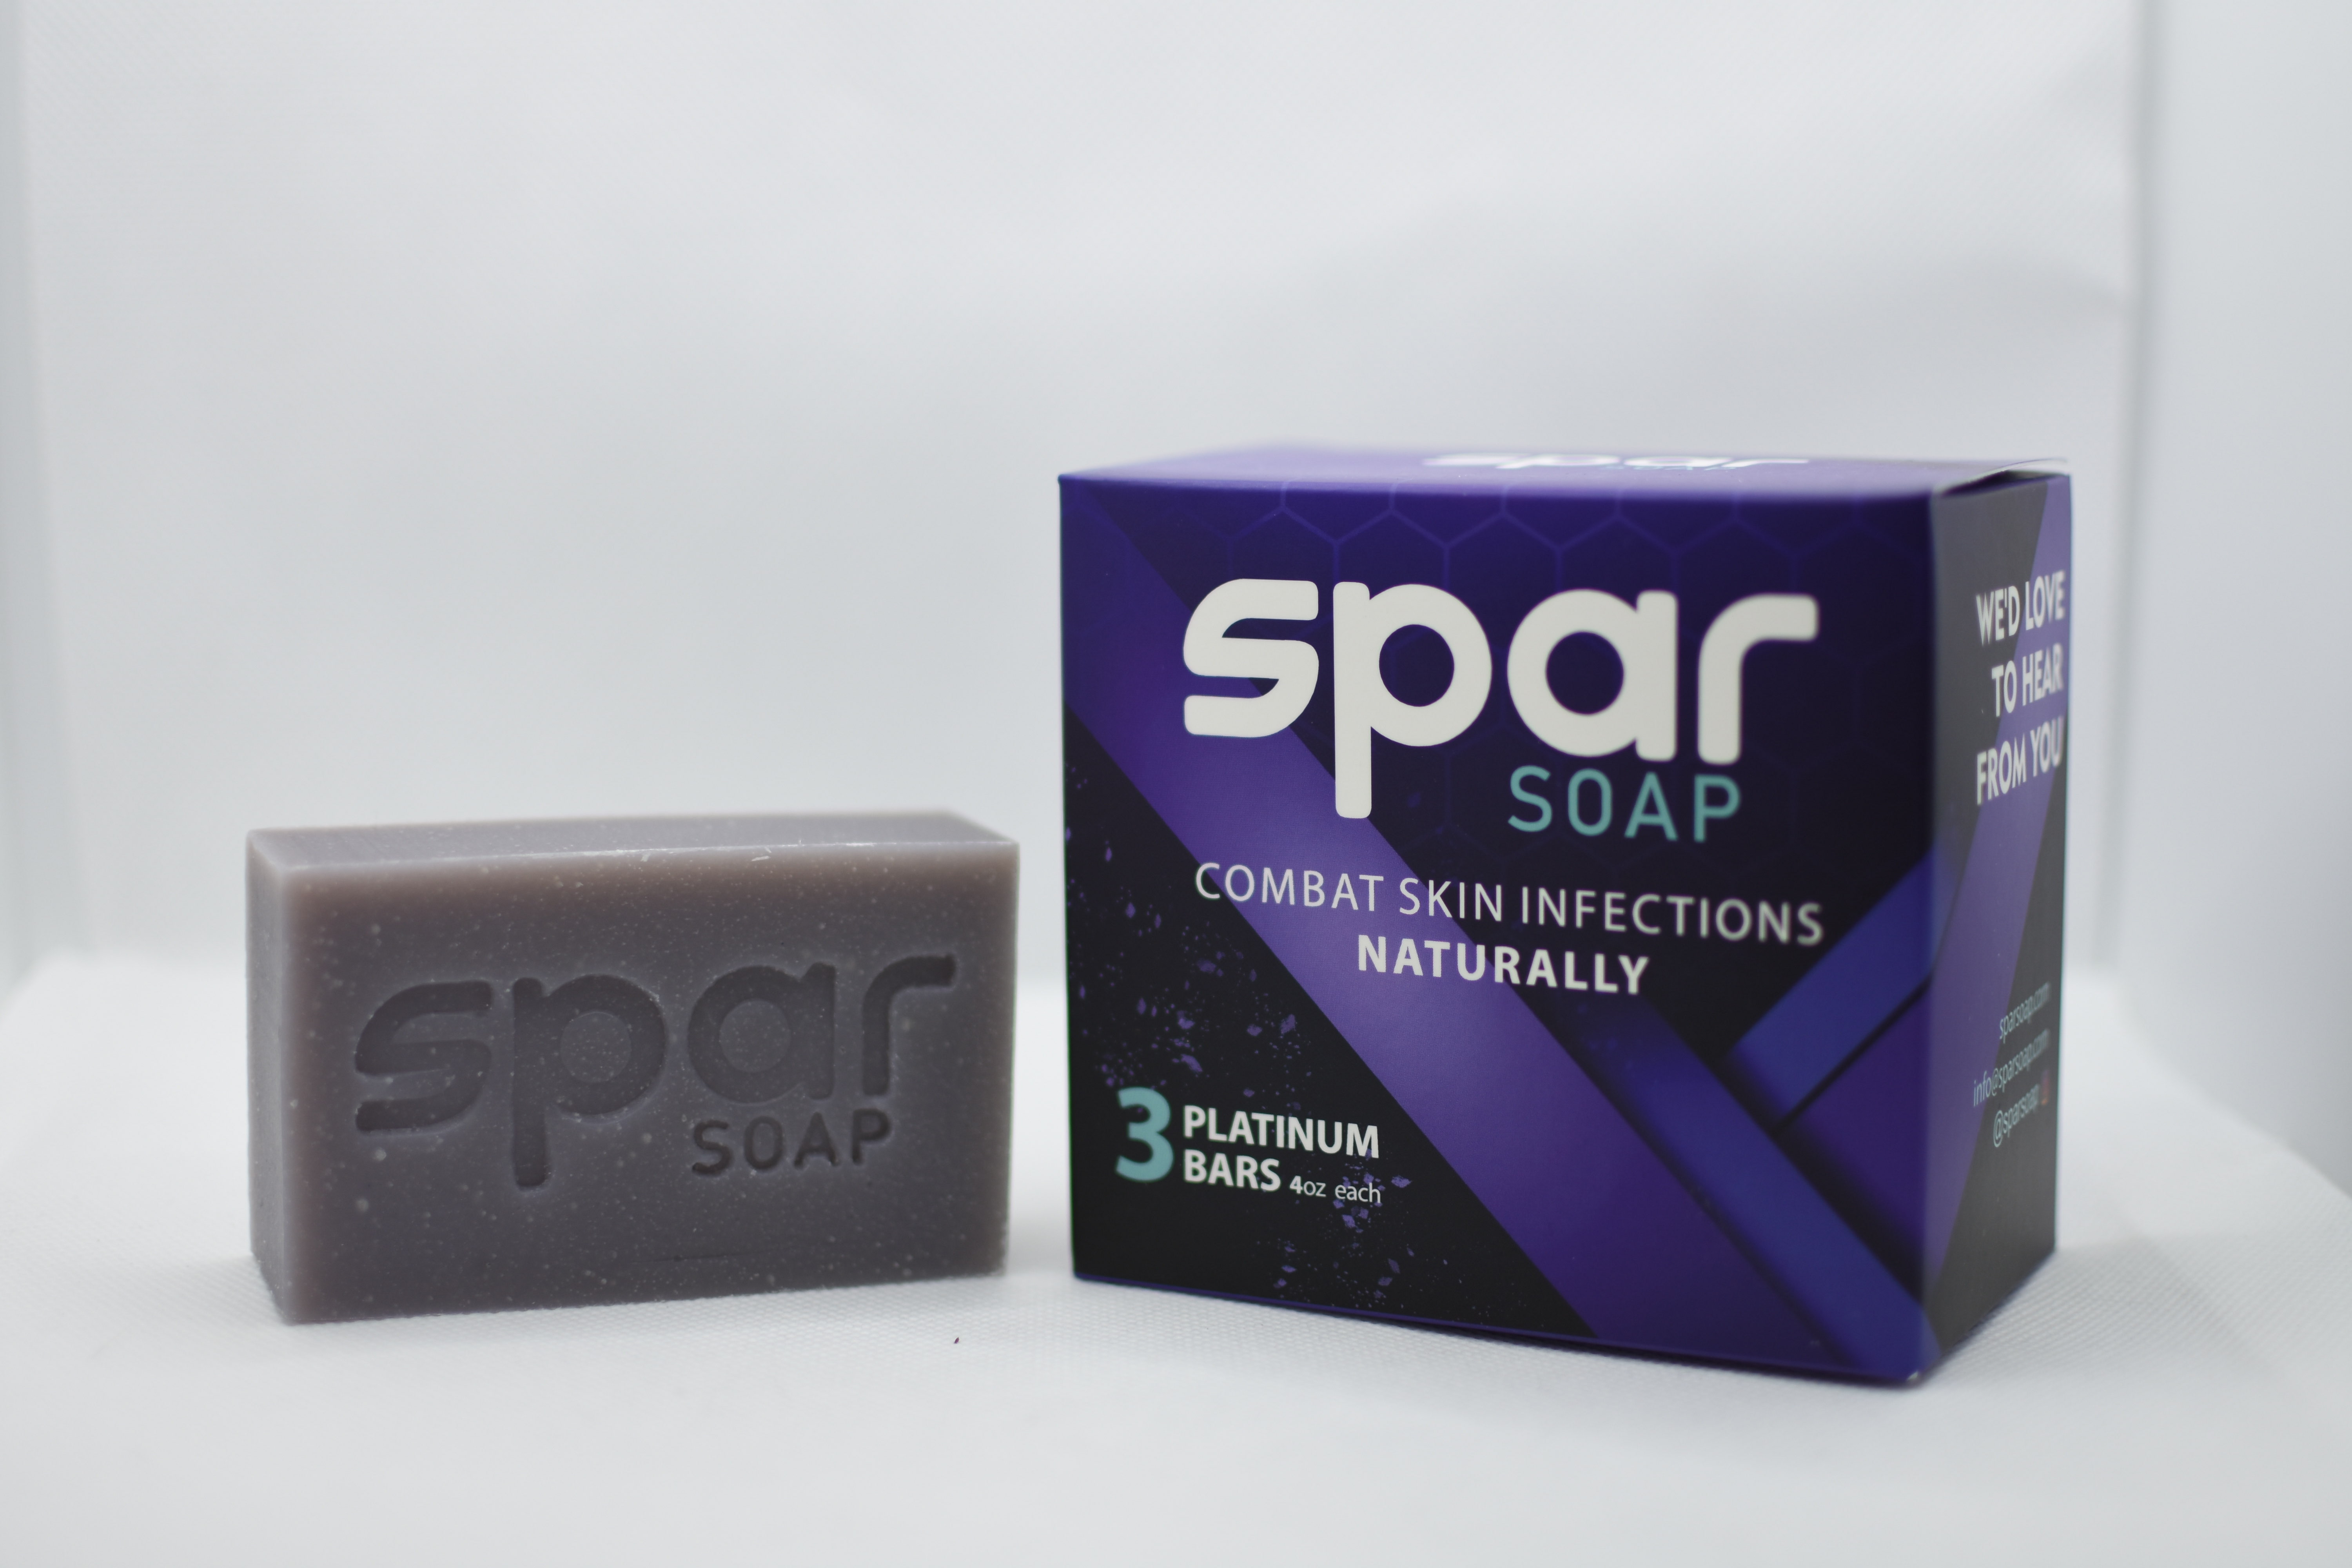 SparSoap Bar Print on the Soap Bar and the Packaging